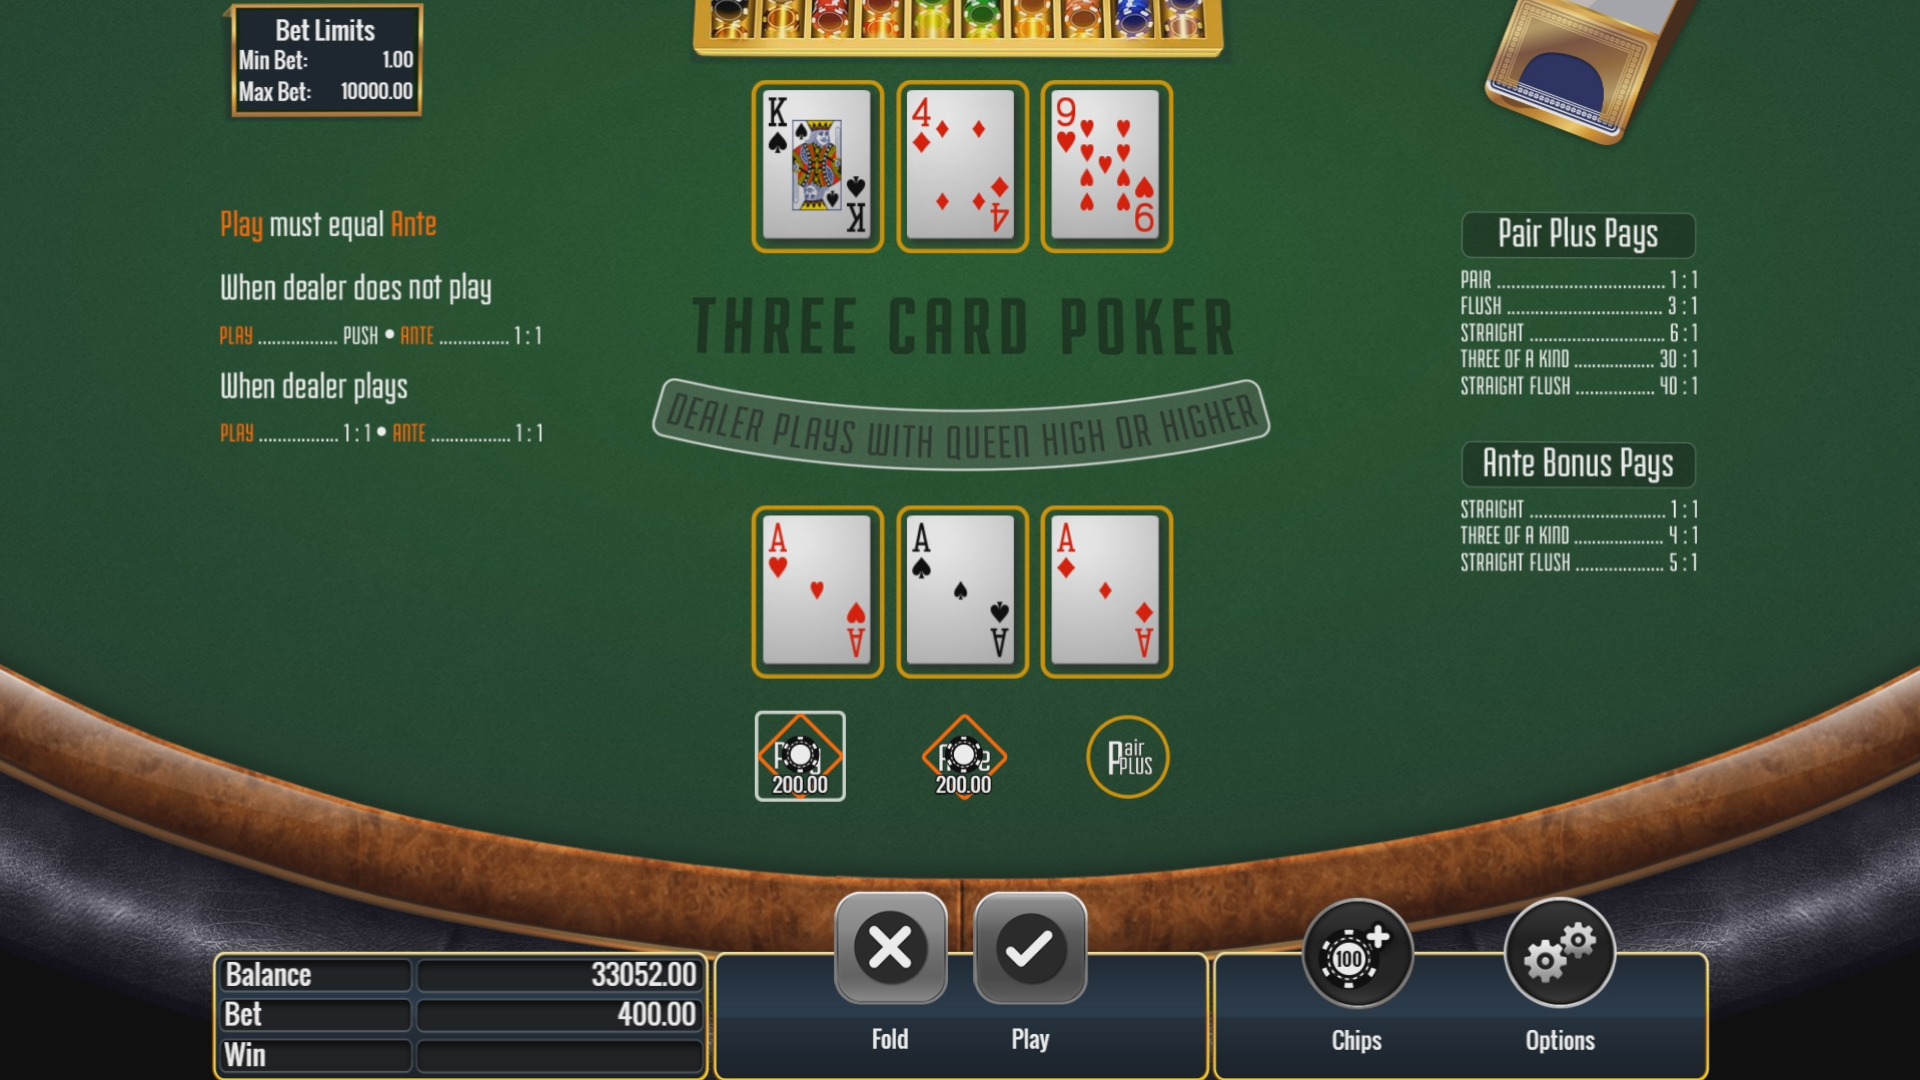 3 card poker approved game california